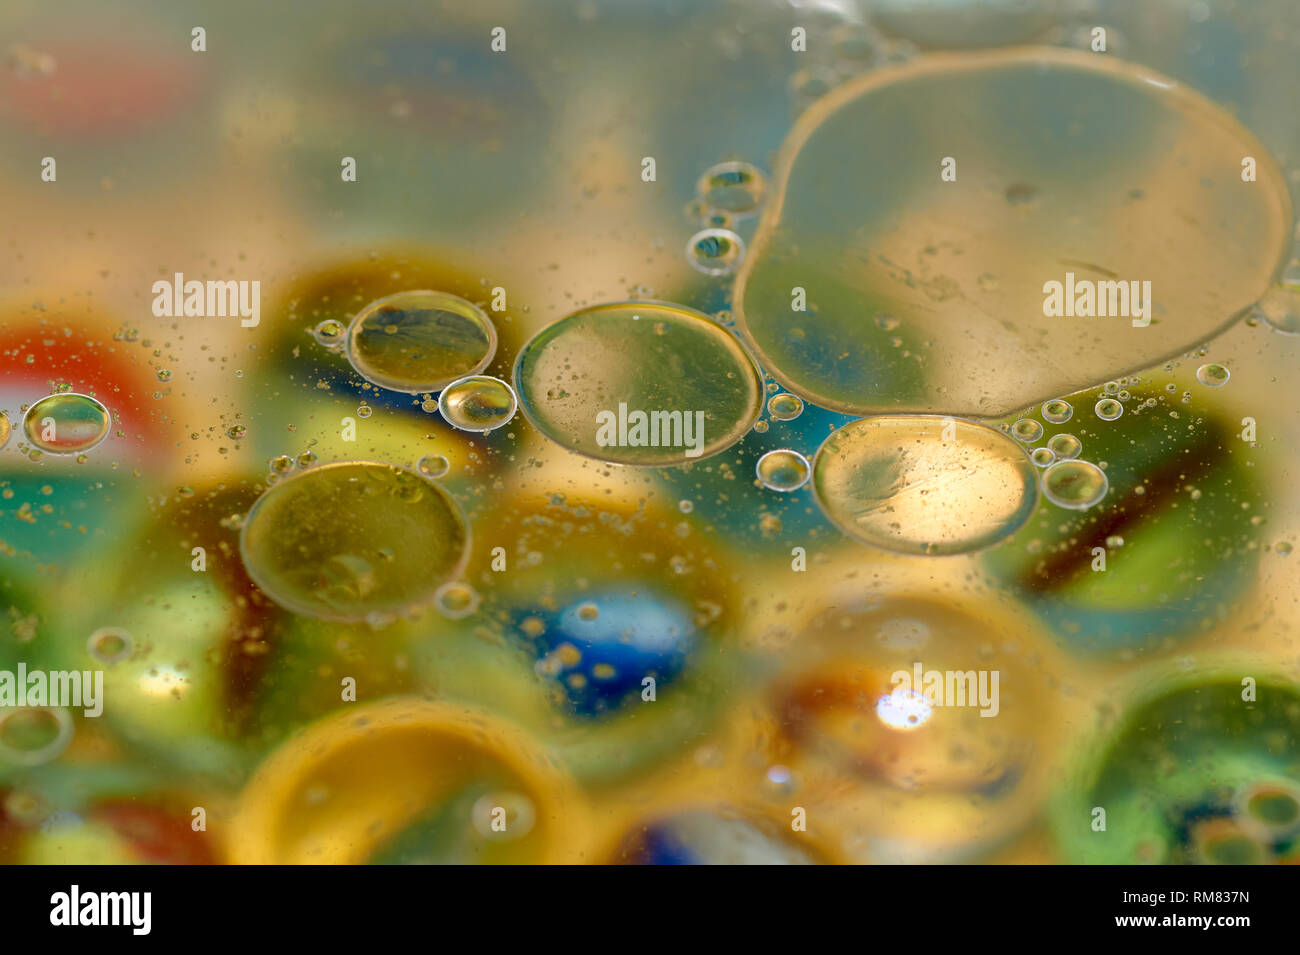 Download Floating In The Water Abstract Colorful Yellow Oil Drops Stock Photo 236206089 Alamy Yellowimages Mockups